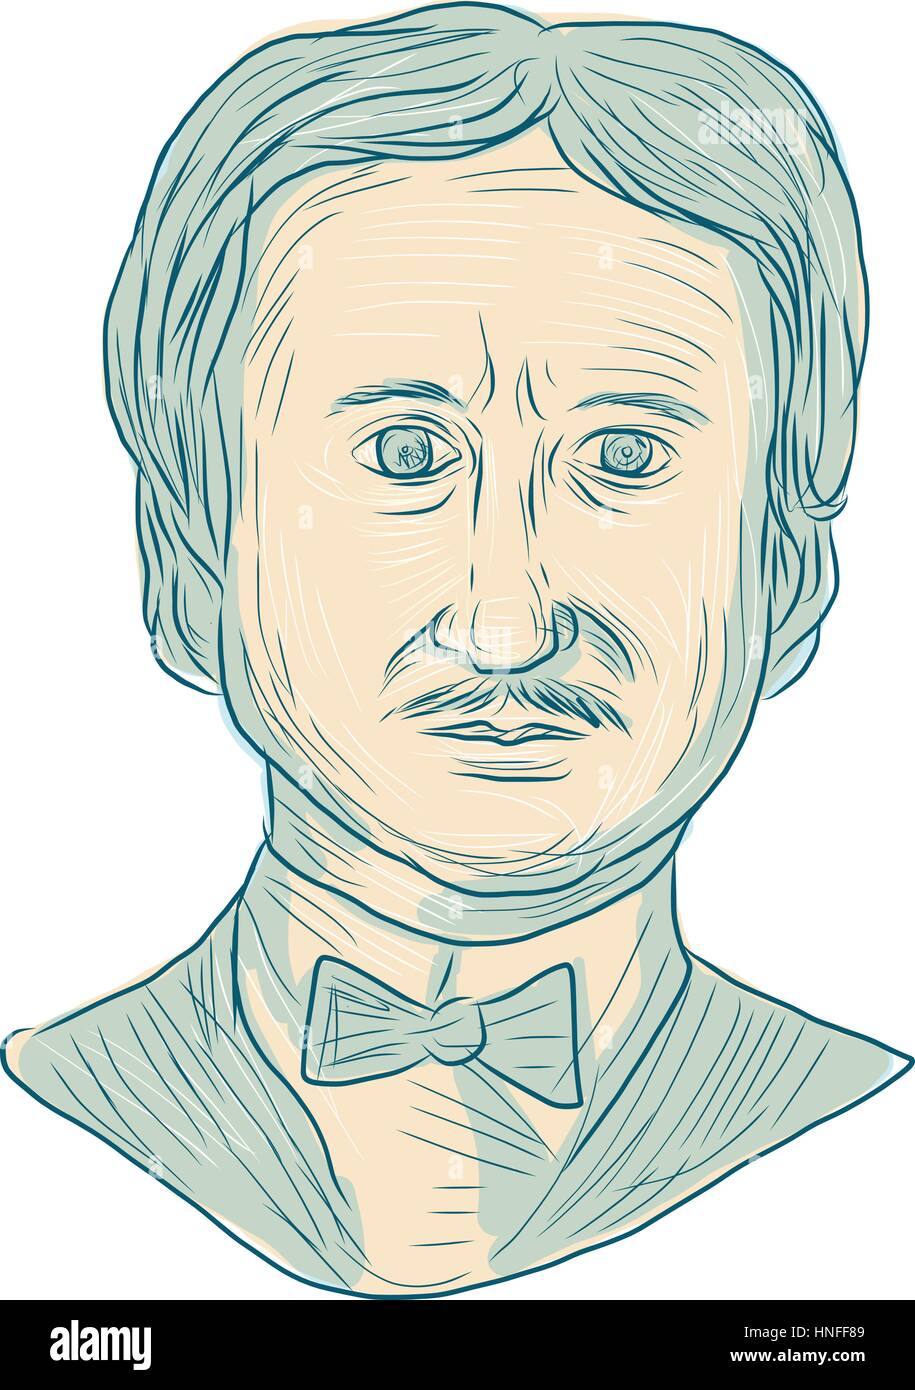 Drawing sketch style illustration of Edgar Allan Poe, an American writer, editor, poet and literary critic viewed from the front set on isolated white Stock Vector